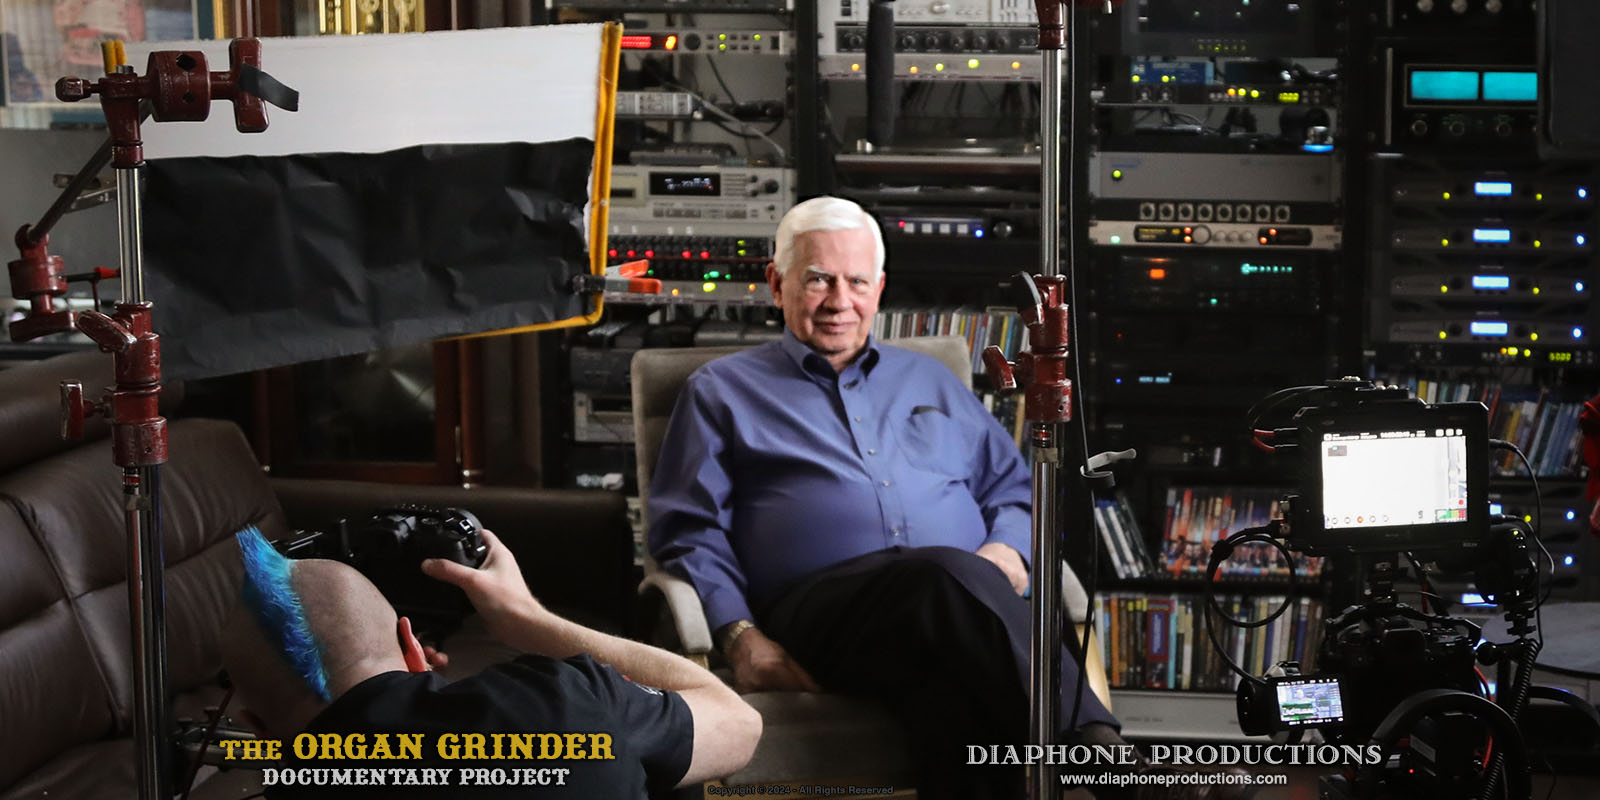 Behind-the-scenes production photo. Dennis Hedberg is seated in front of his wall-sized audio system, surrounded by camera and lighting equipment.